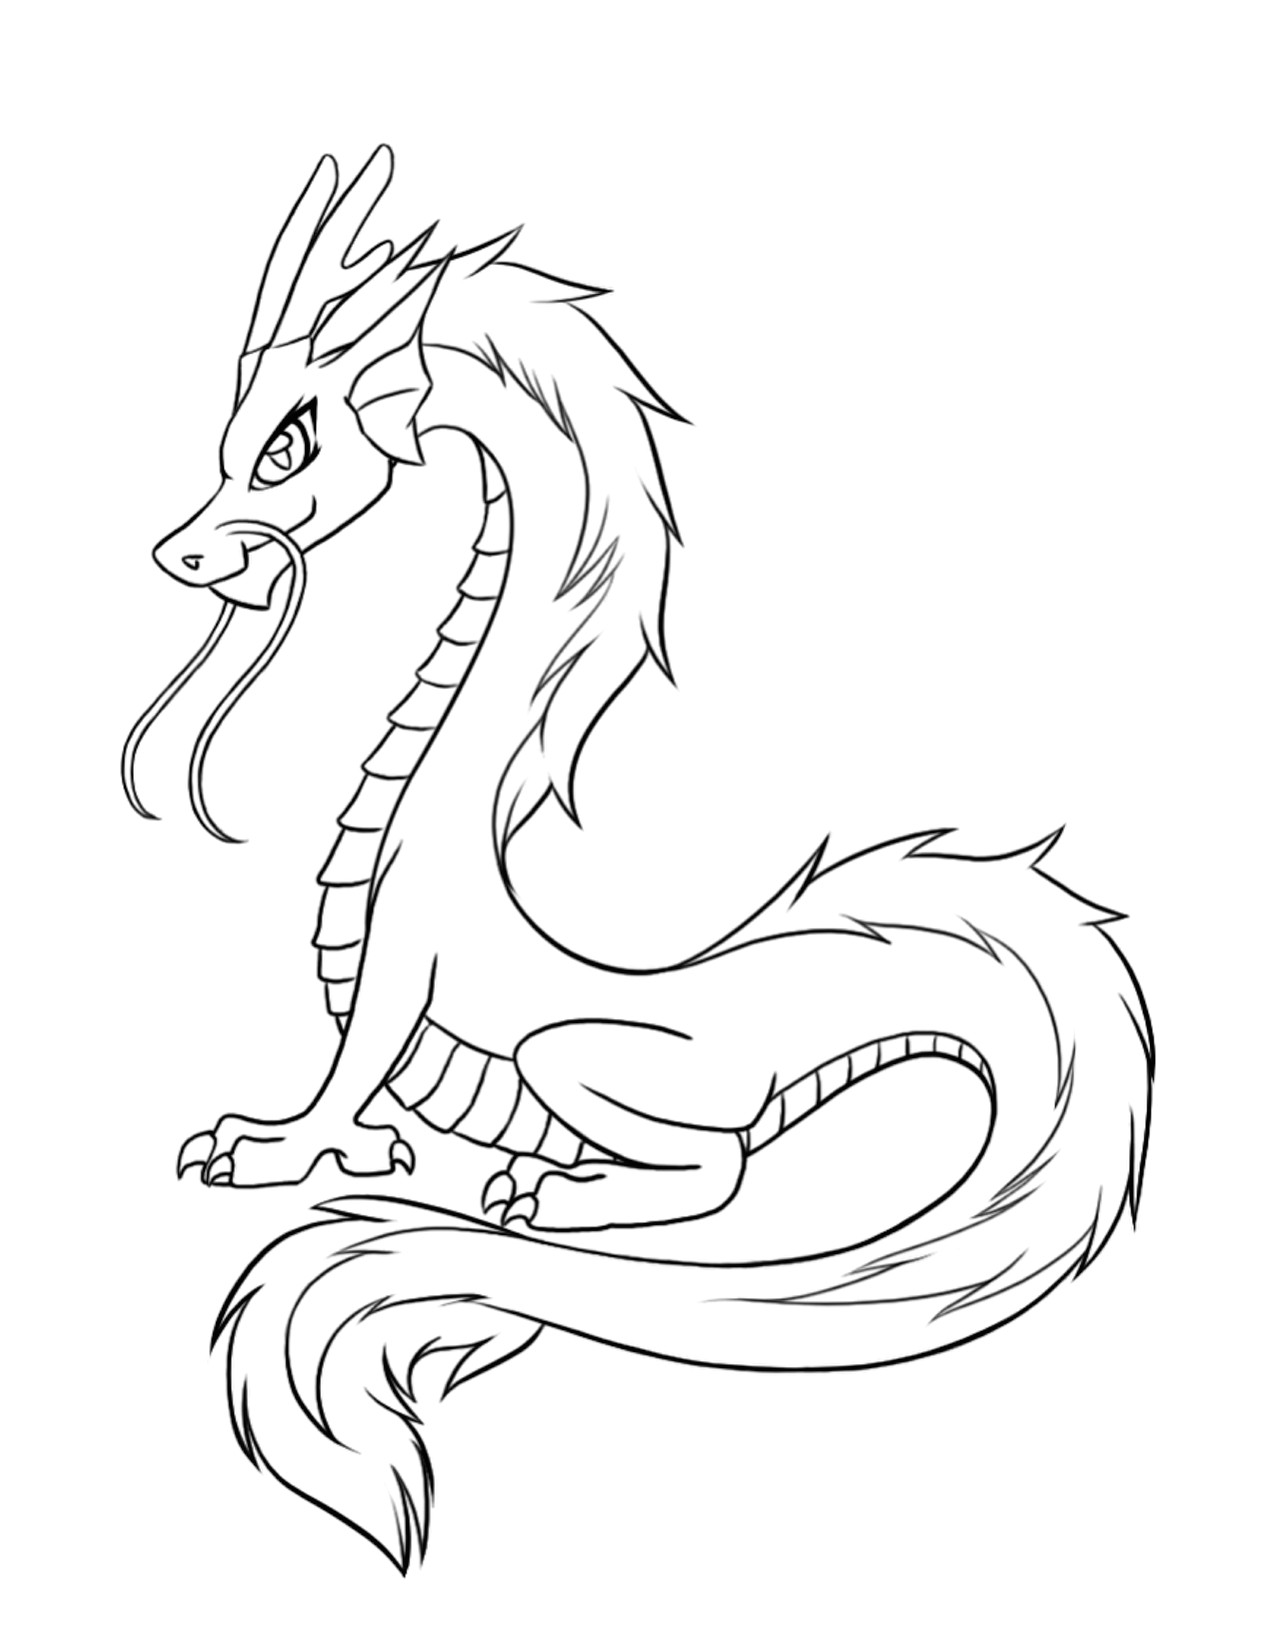 Drawings Of Friendly Dragons Free Printable Dragon Coloring Pages for Kids Dragon Sketch